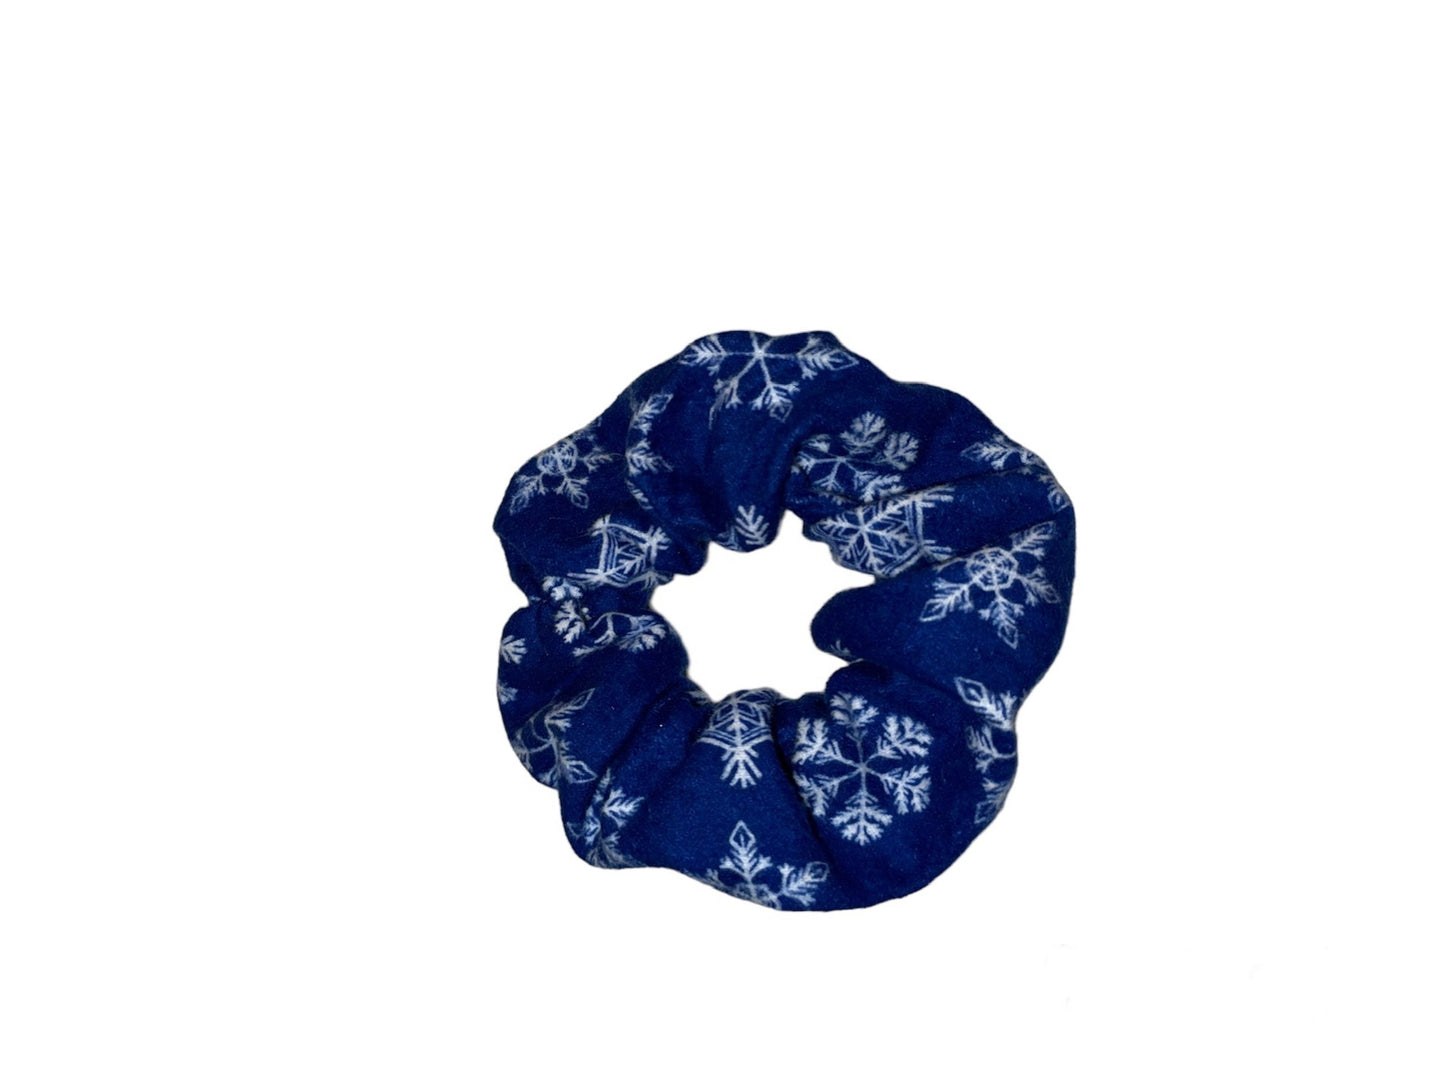 Tied Together Blue Snowflakes scrunchie